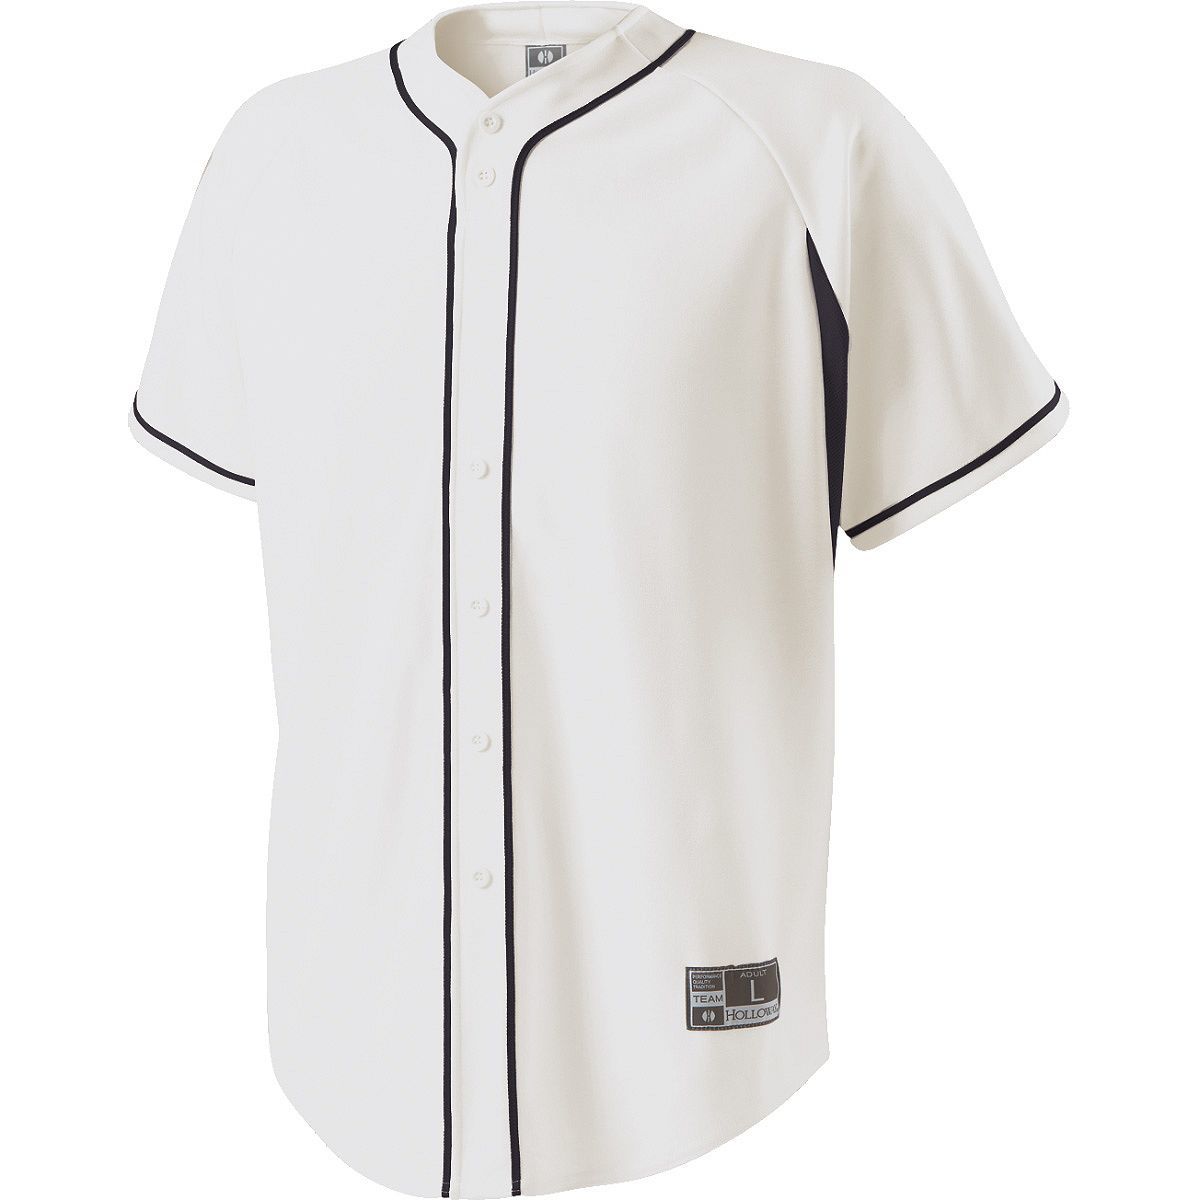 Holloway Youth Ignite Jersey in White/Black  -Part of the Youth, Youth-Jersey, Baseball, Holloway, Shirts, All-Sports, All-Sports-1 product lines at KanaleyCreations.com